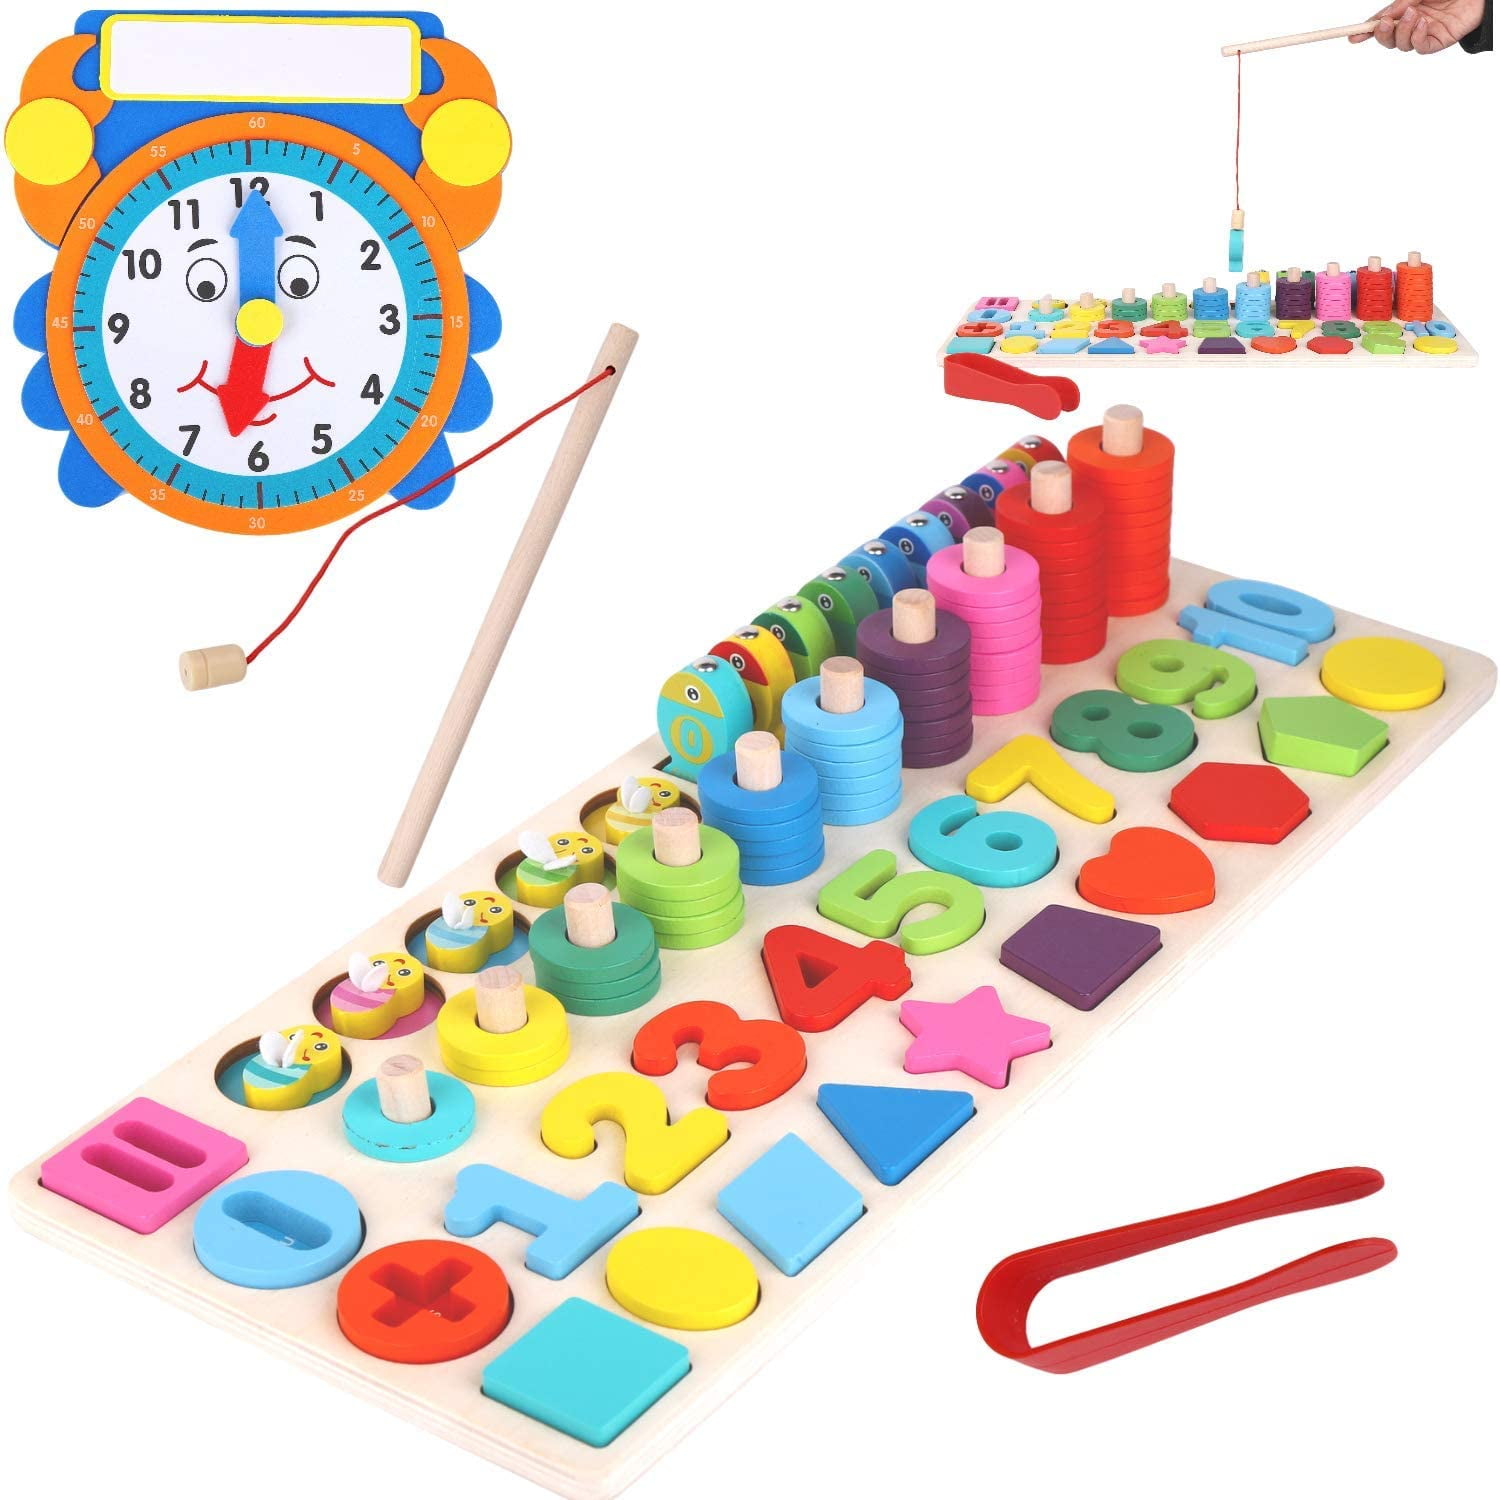 4 in 1 Wooden Number/Rings/Shape/Color Montessori Game Preschool Learning 